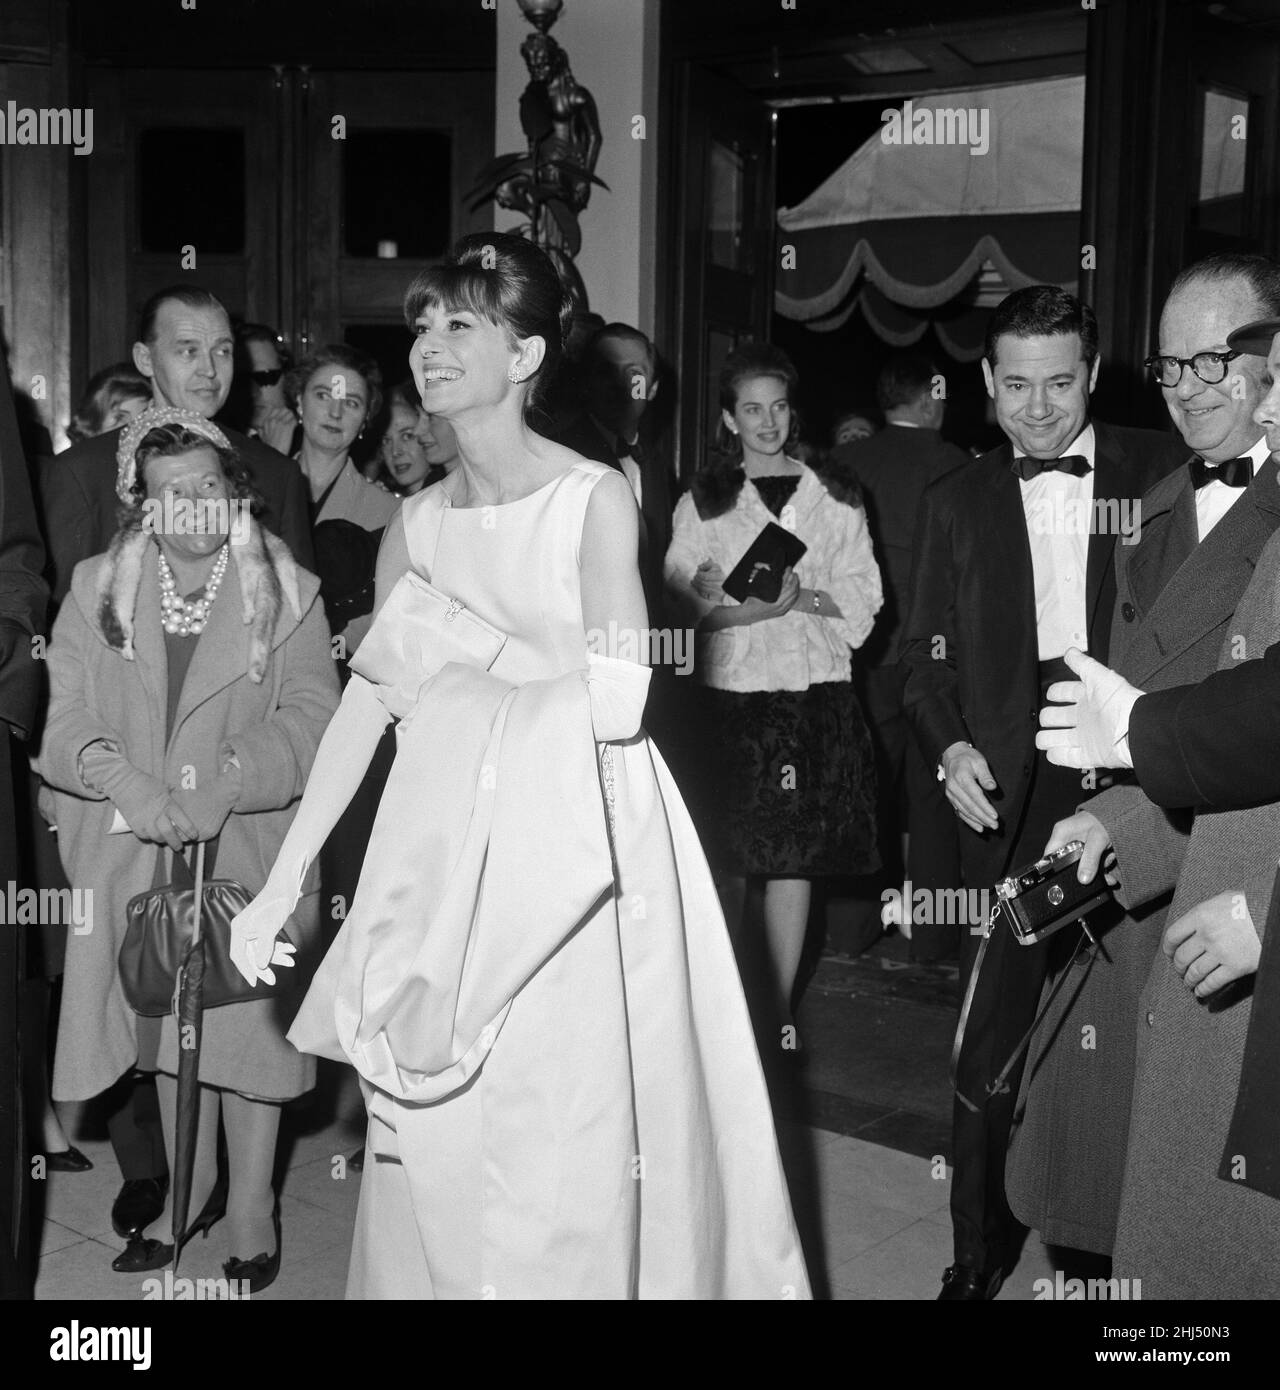 Audrey Hepburn at the London premier of "Breakfast at Tiffany's". Plaza Theatre, London. 19th October 1961. Stock Photo